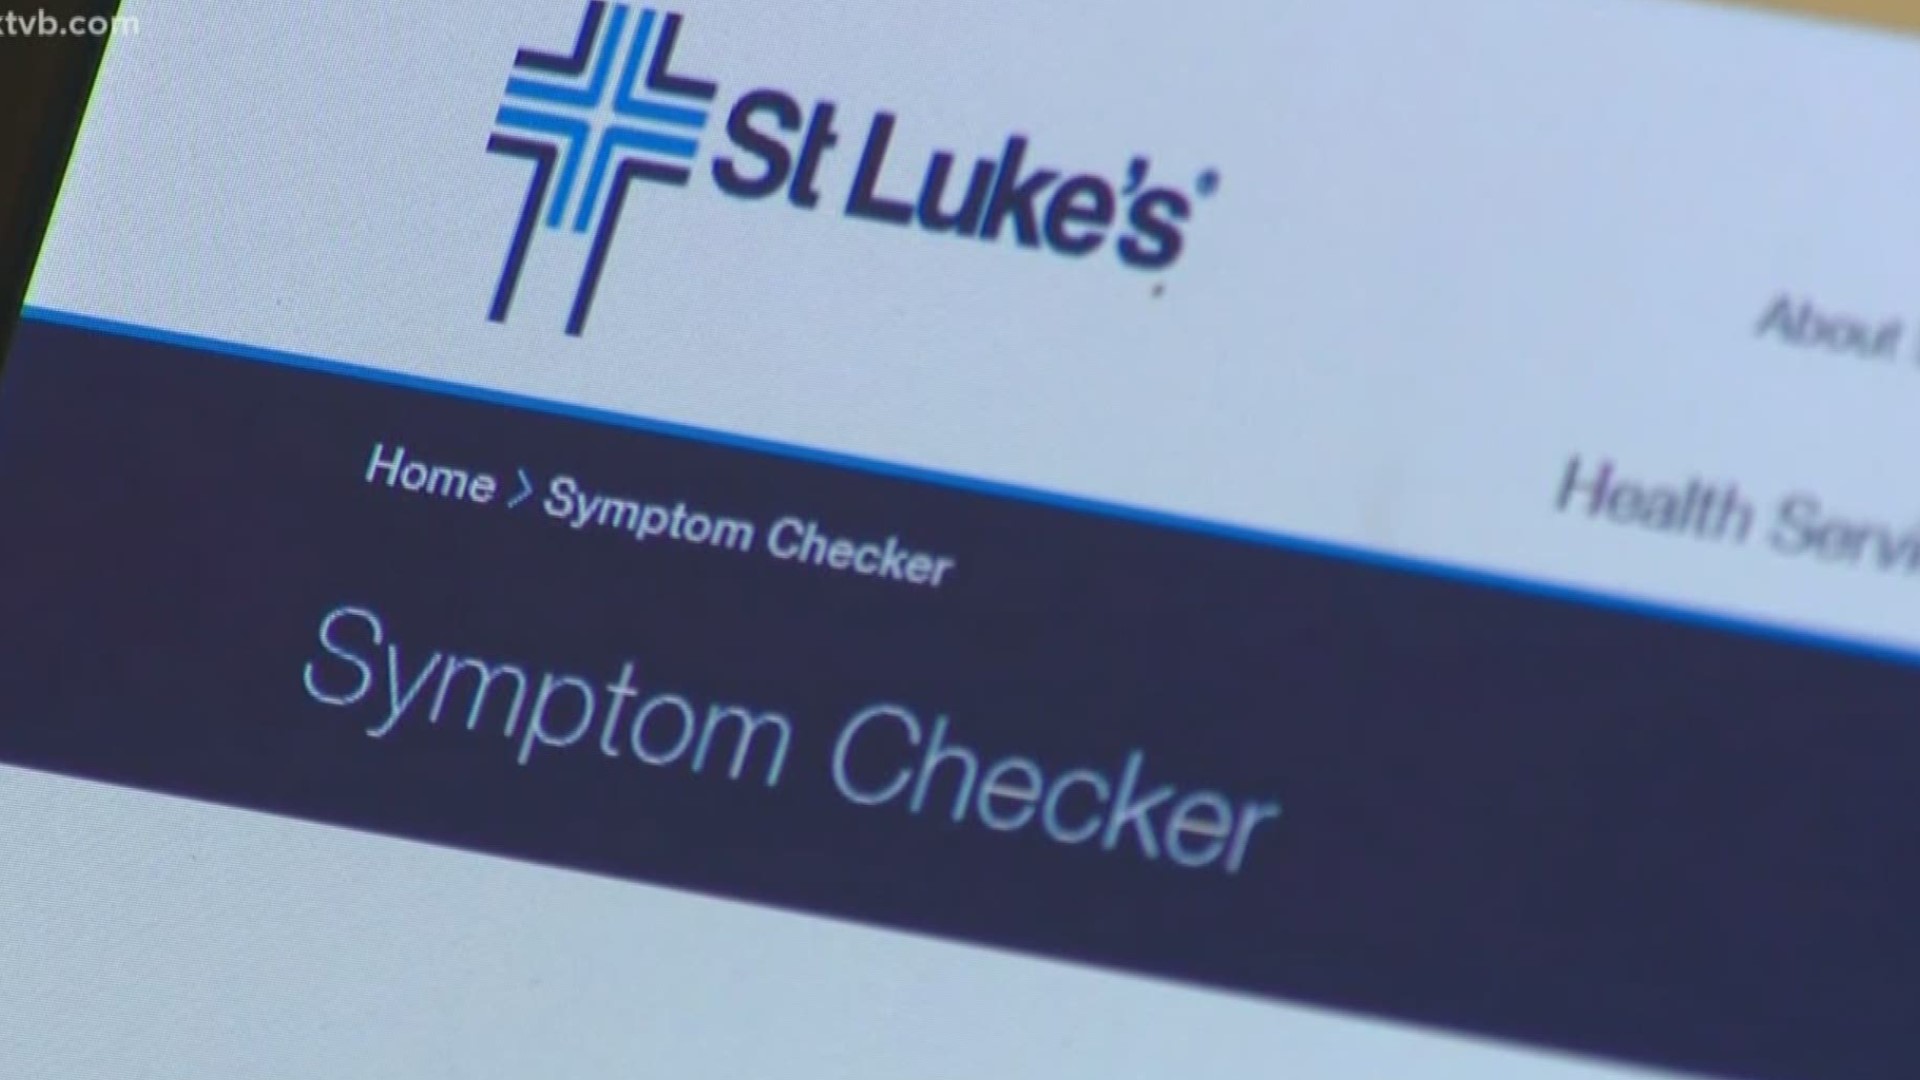 St. Luke's and West Valley Medical Center now have online self-assessments to help patients determine if they should seek testing or additional medical care.